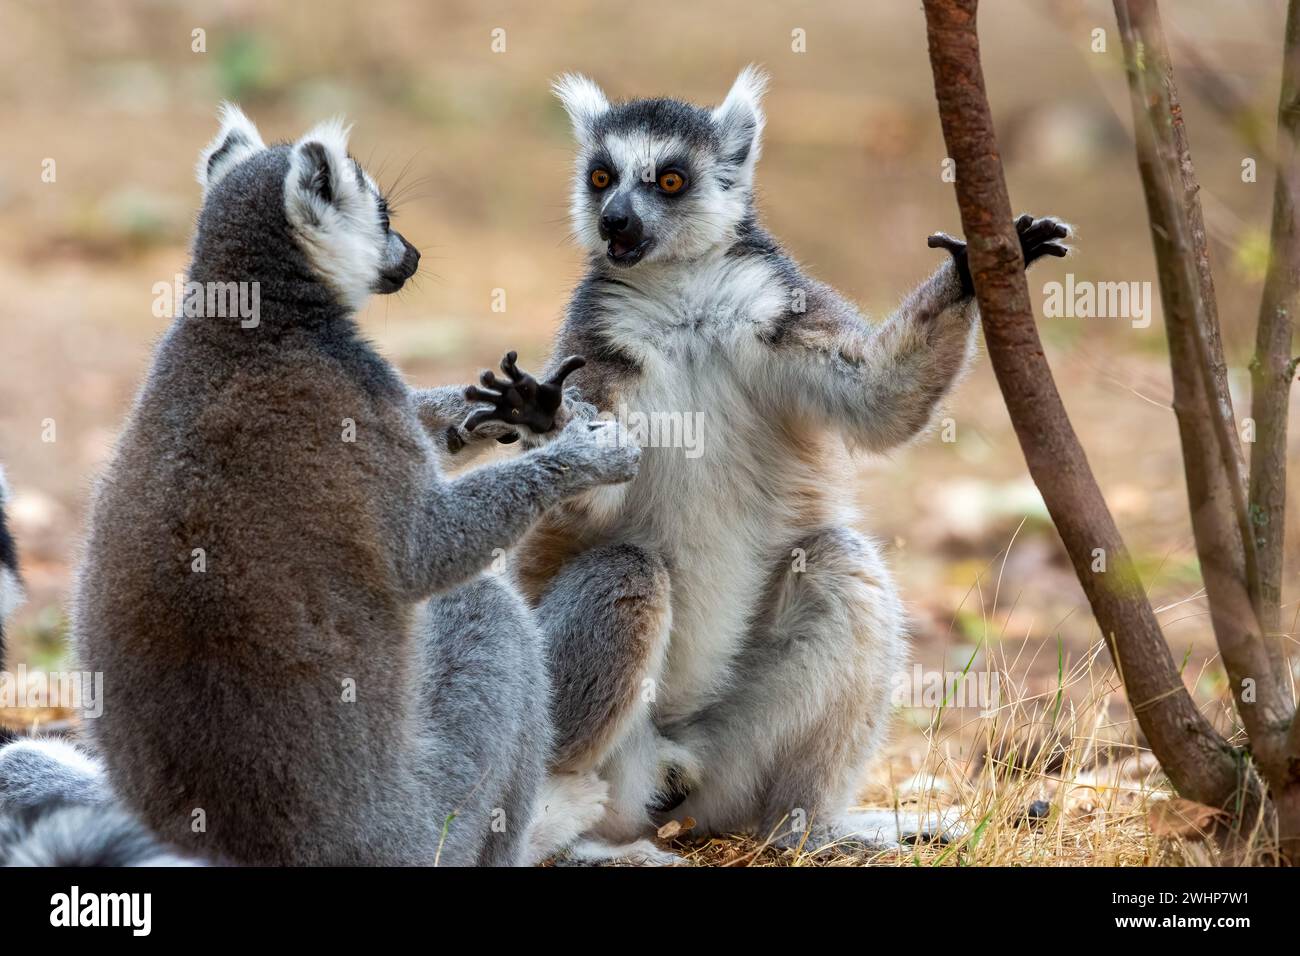 The two lemurs with hands touching, standing side by side. Stock Photo